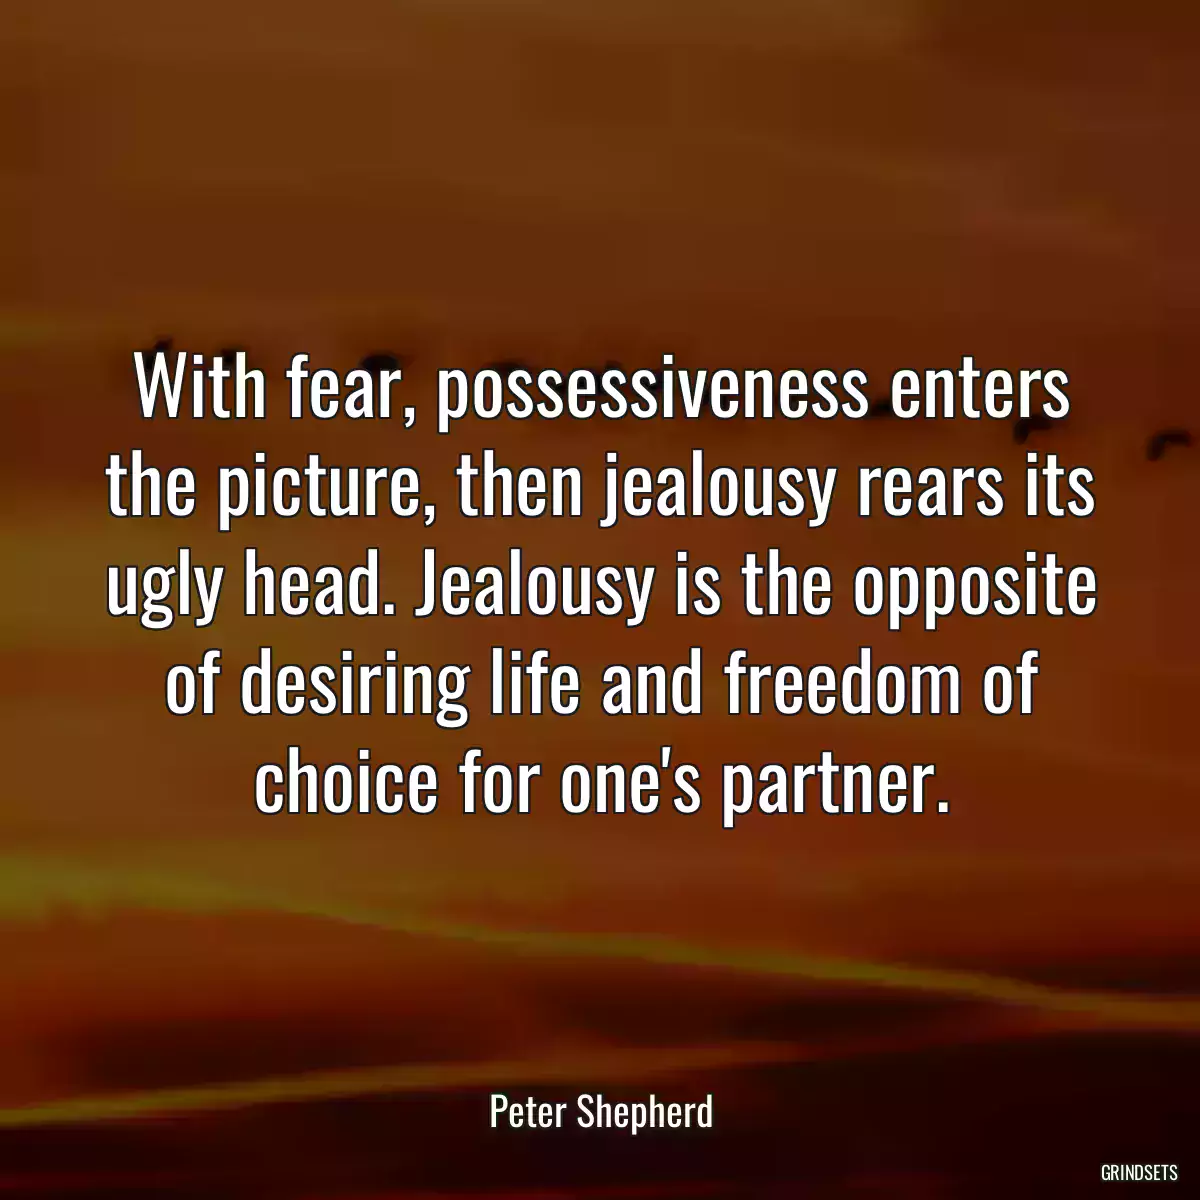 With fear, possessiveness enters the picture, then jealousy rears its ugly head. Jealousy is the opposite of desiring life and freedom of choice for one\'s partner.